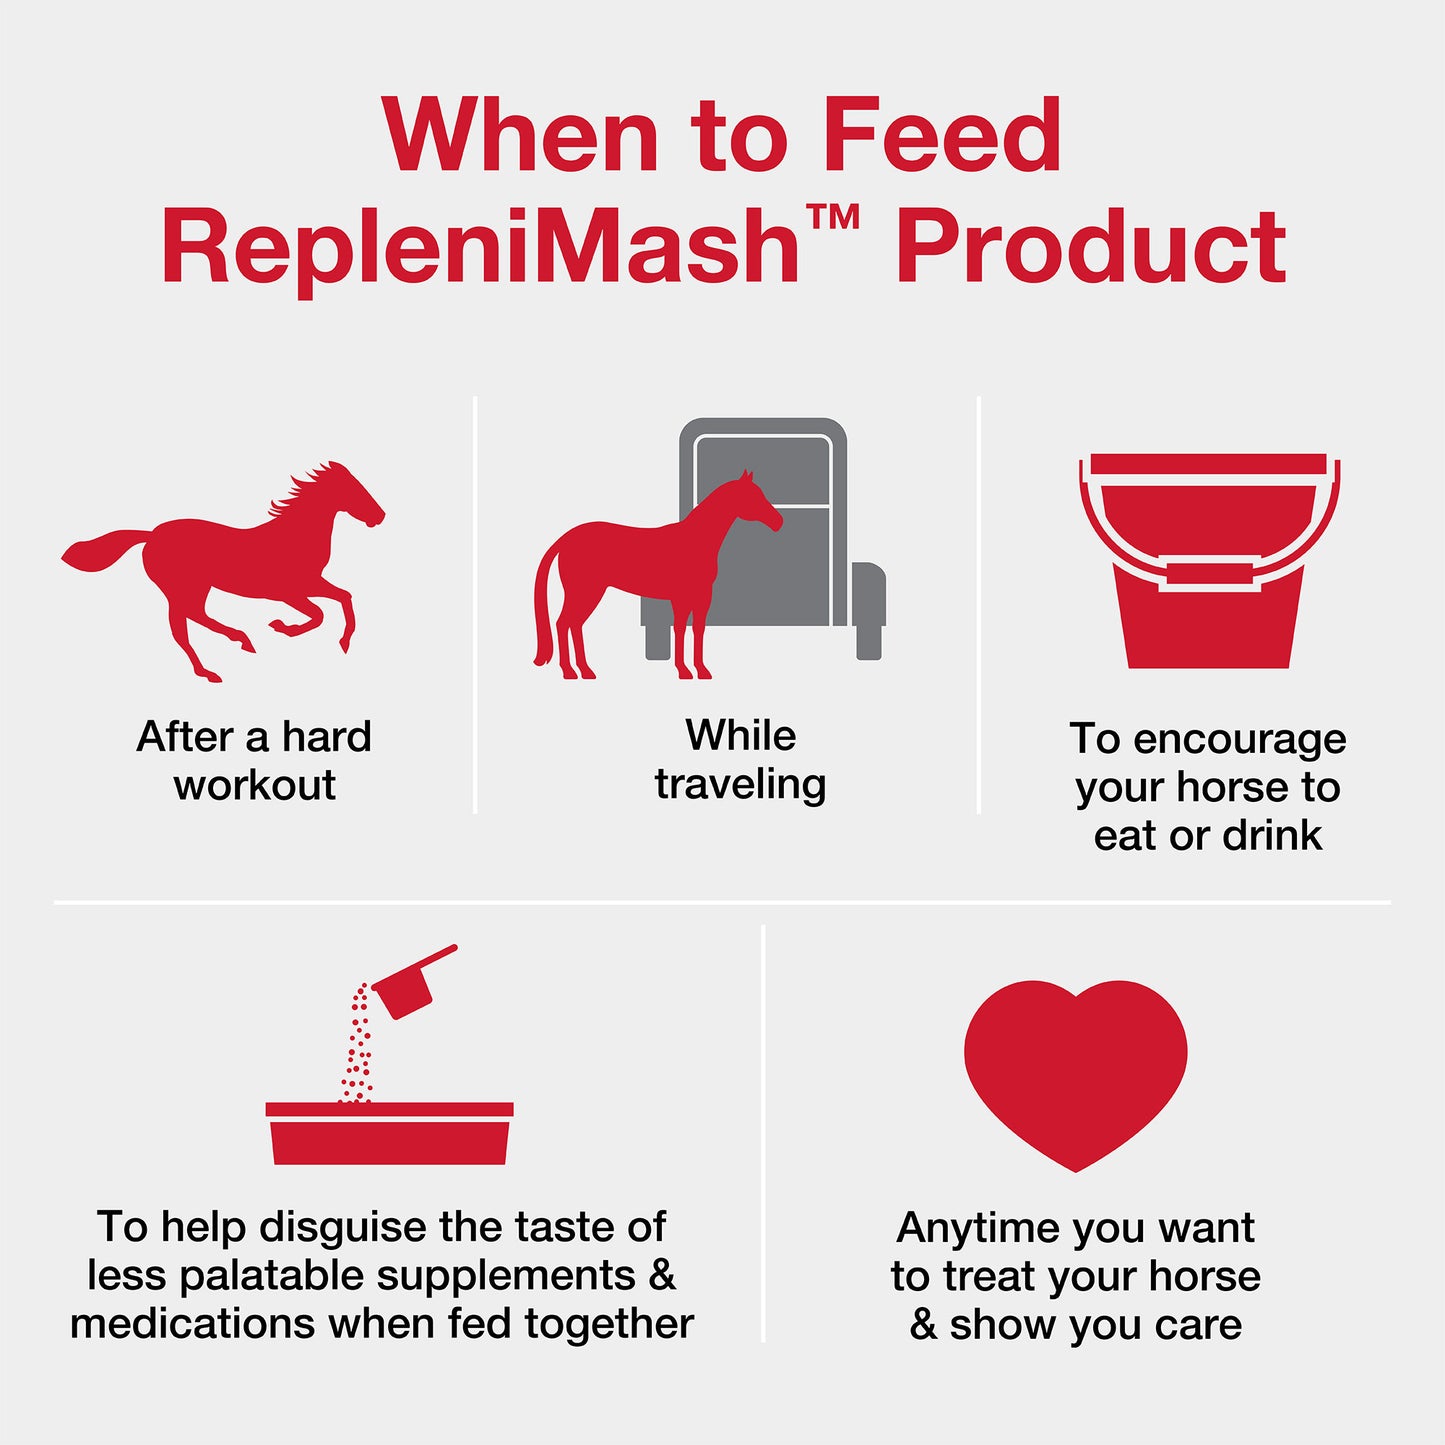 When to feed replenisMash Products